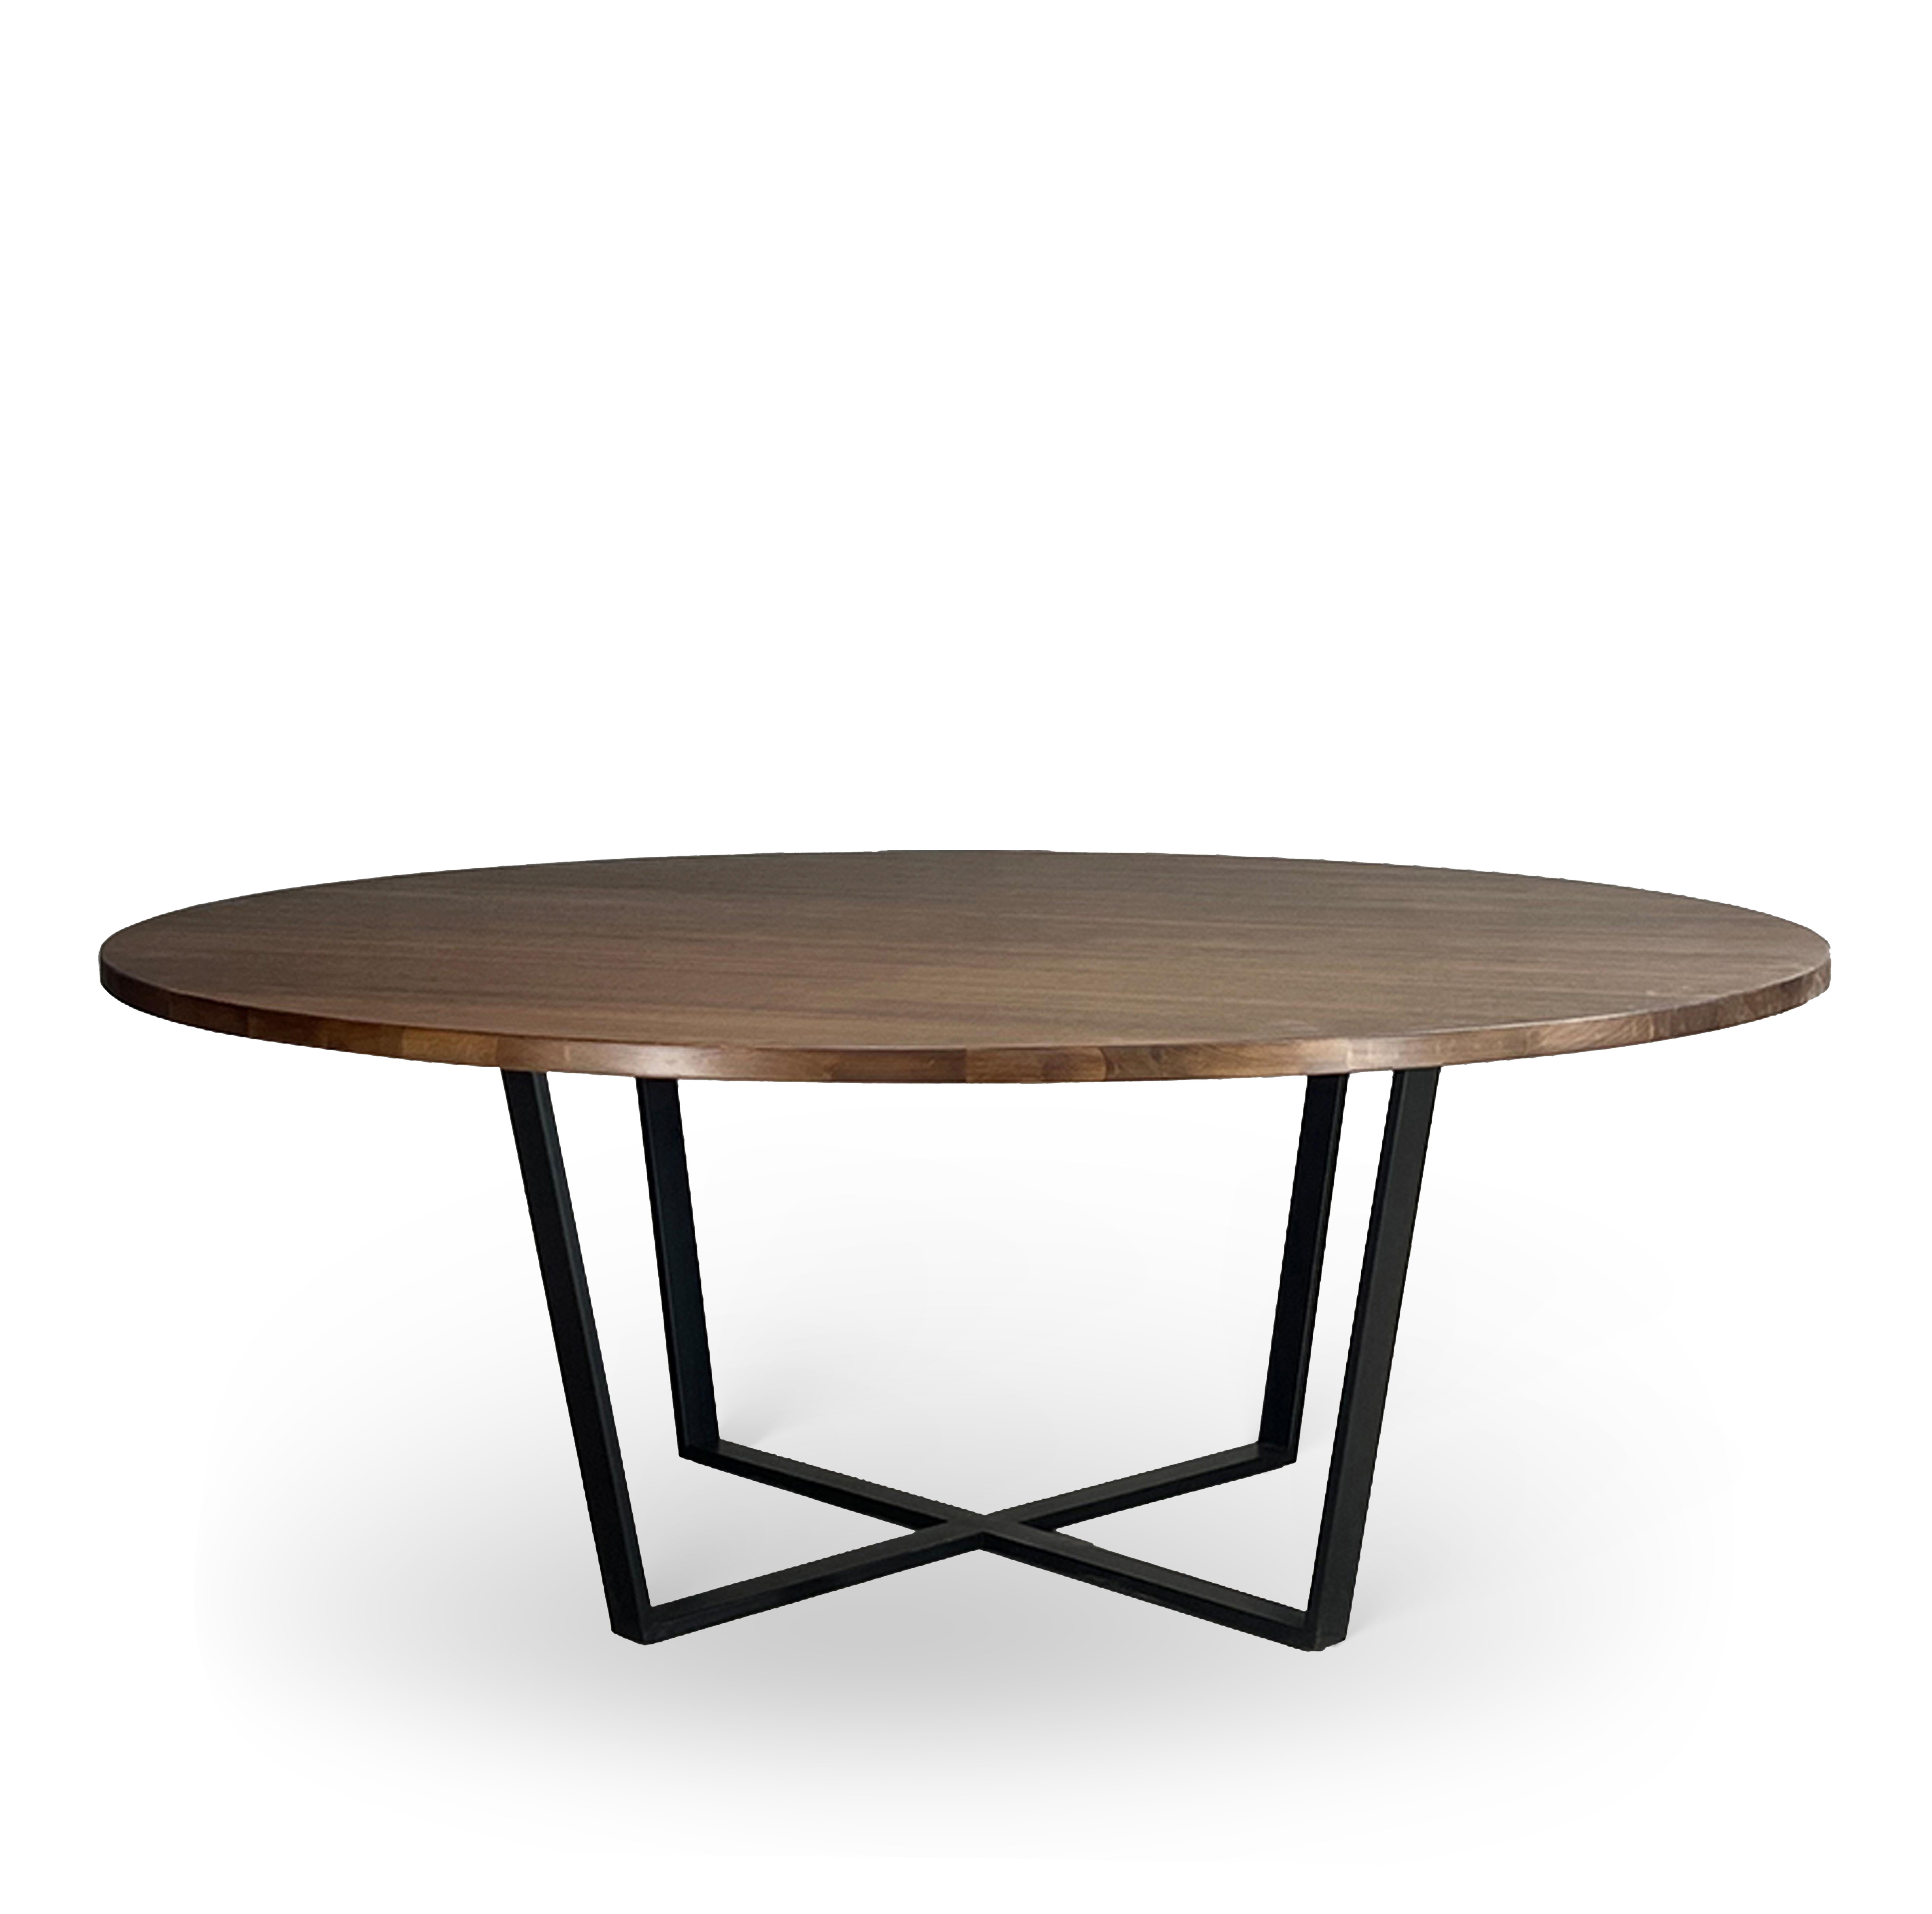  RIMA DINING TABLE FOR 10 PERSON